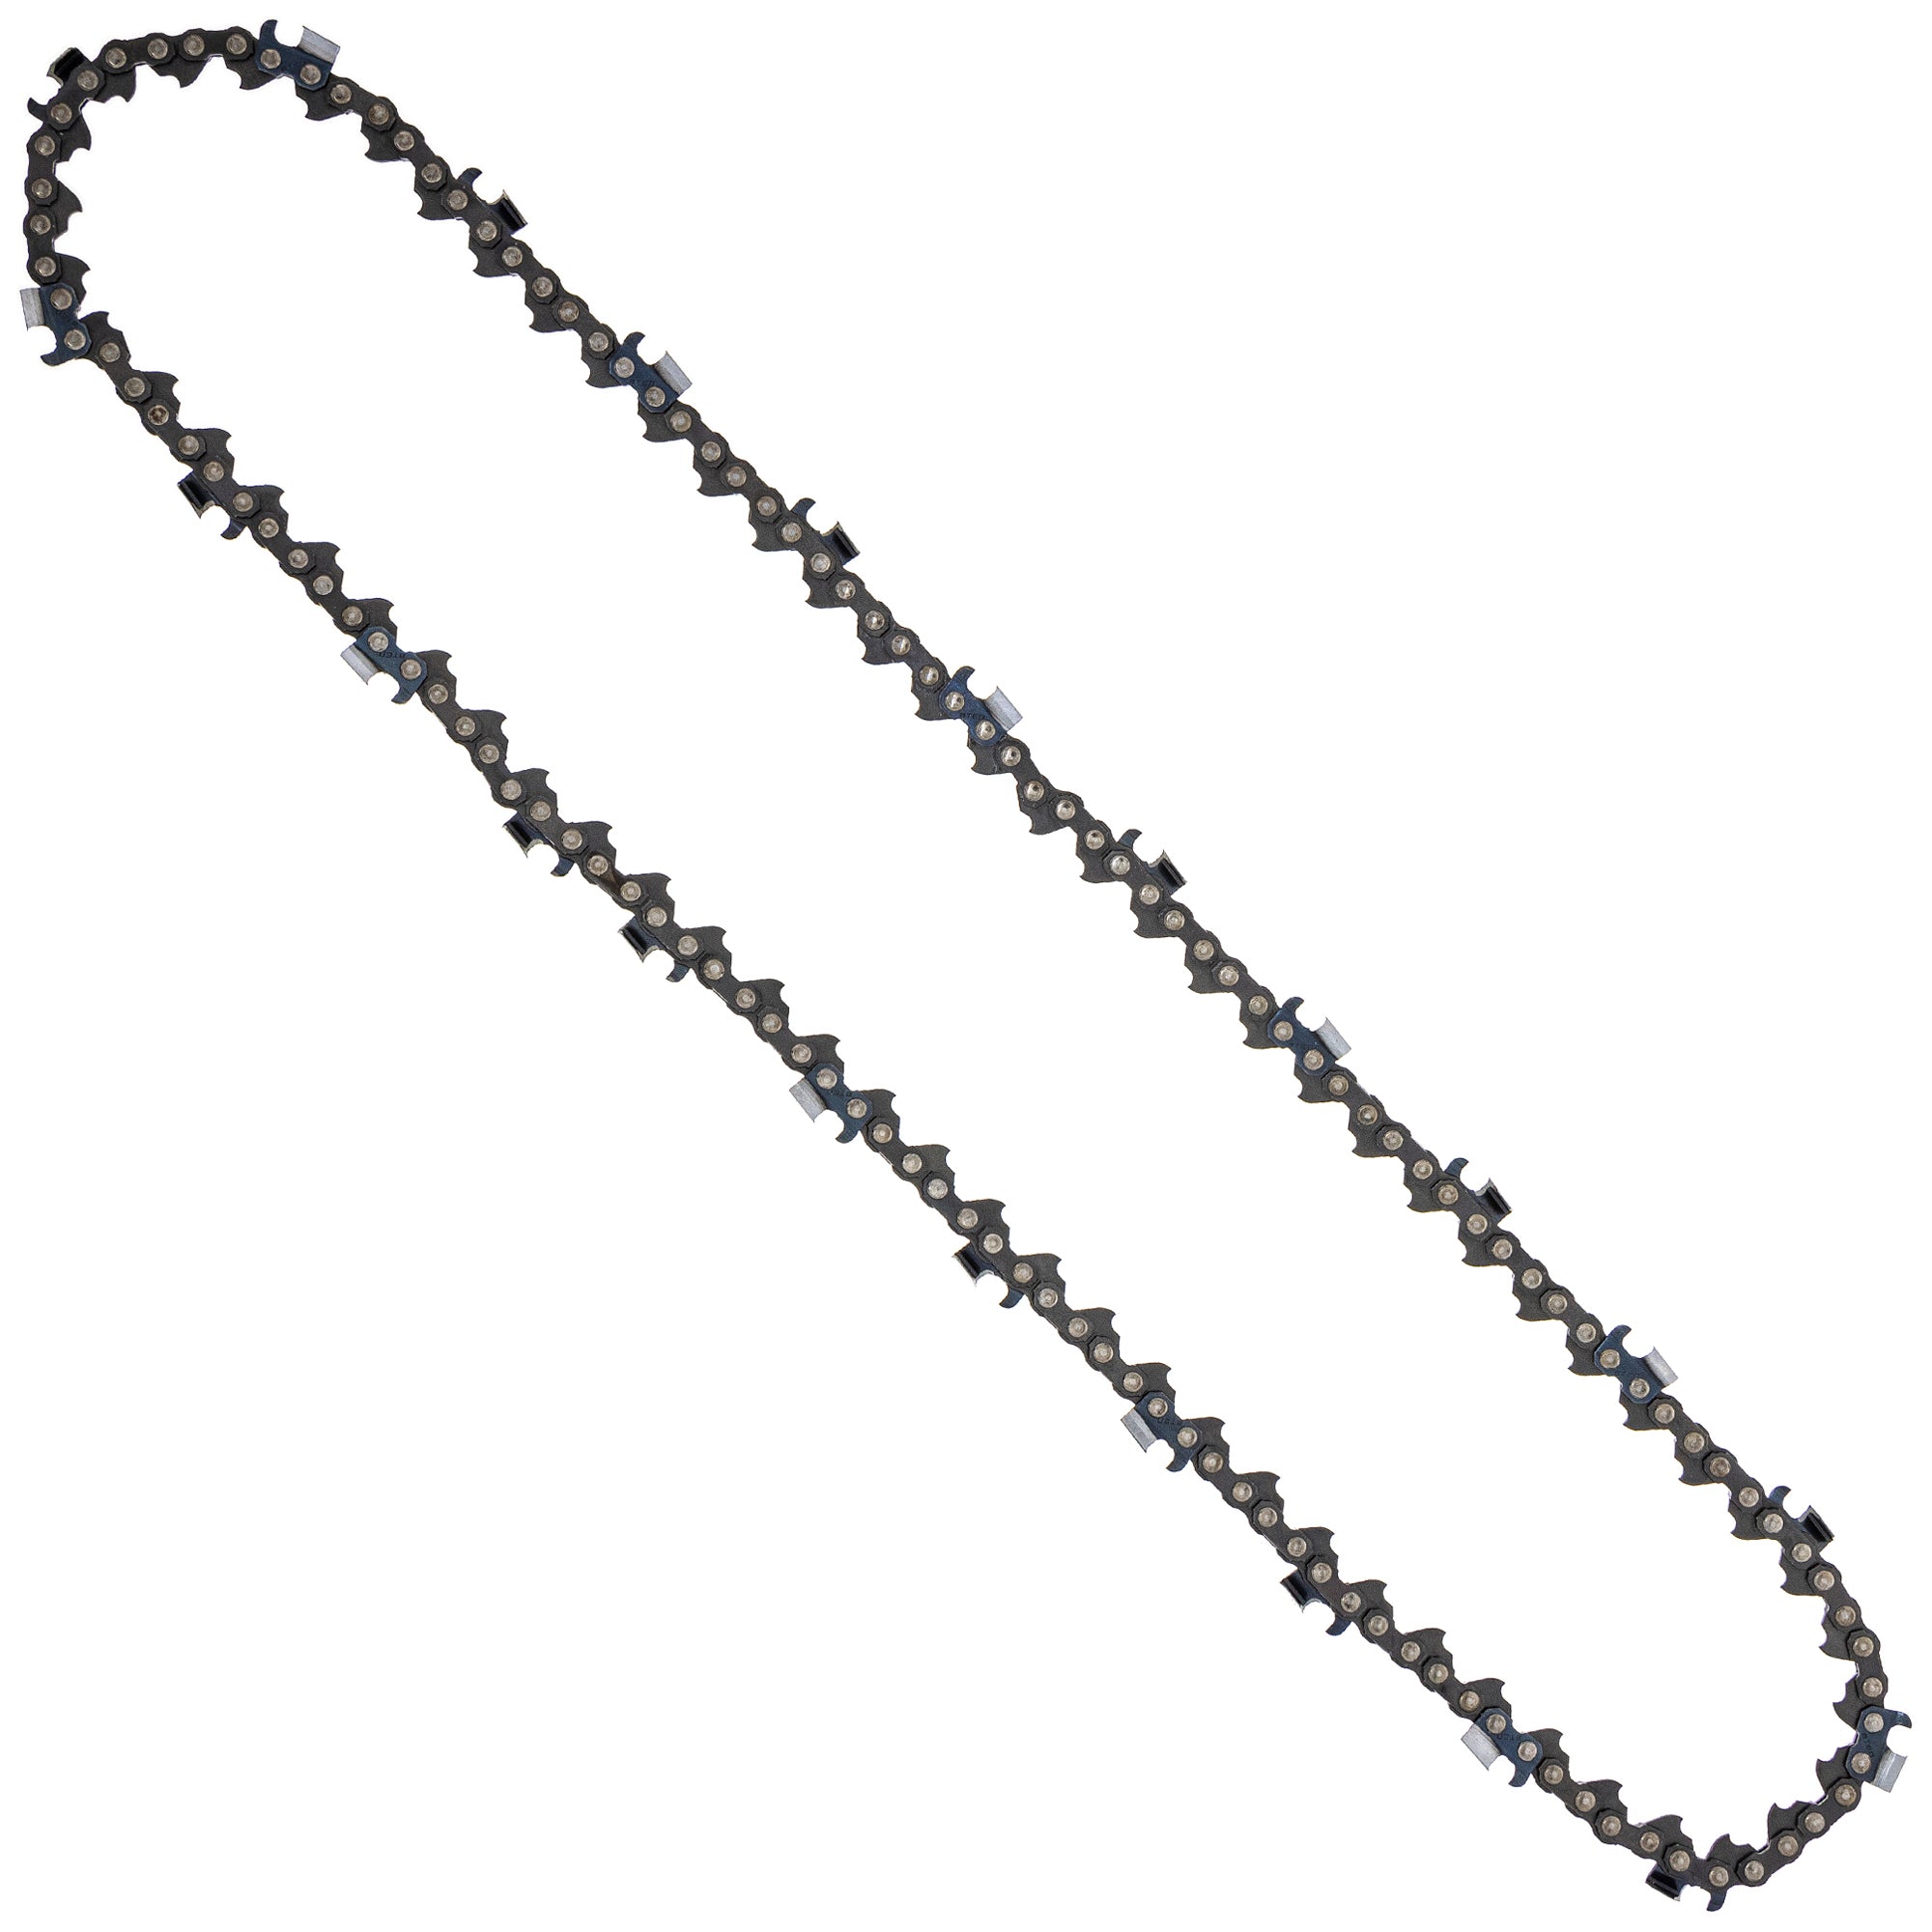 8TEN 810-CCC2392H Chain 2-Pack for zOTHER Oregon Husqvarna Poulan